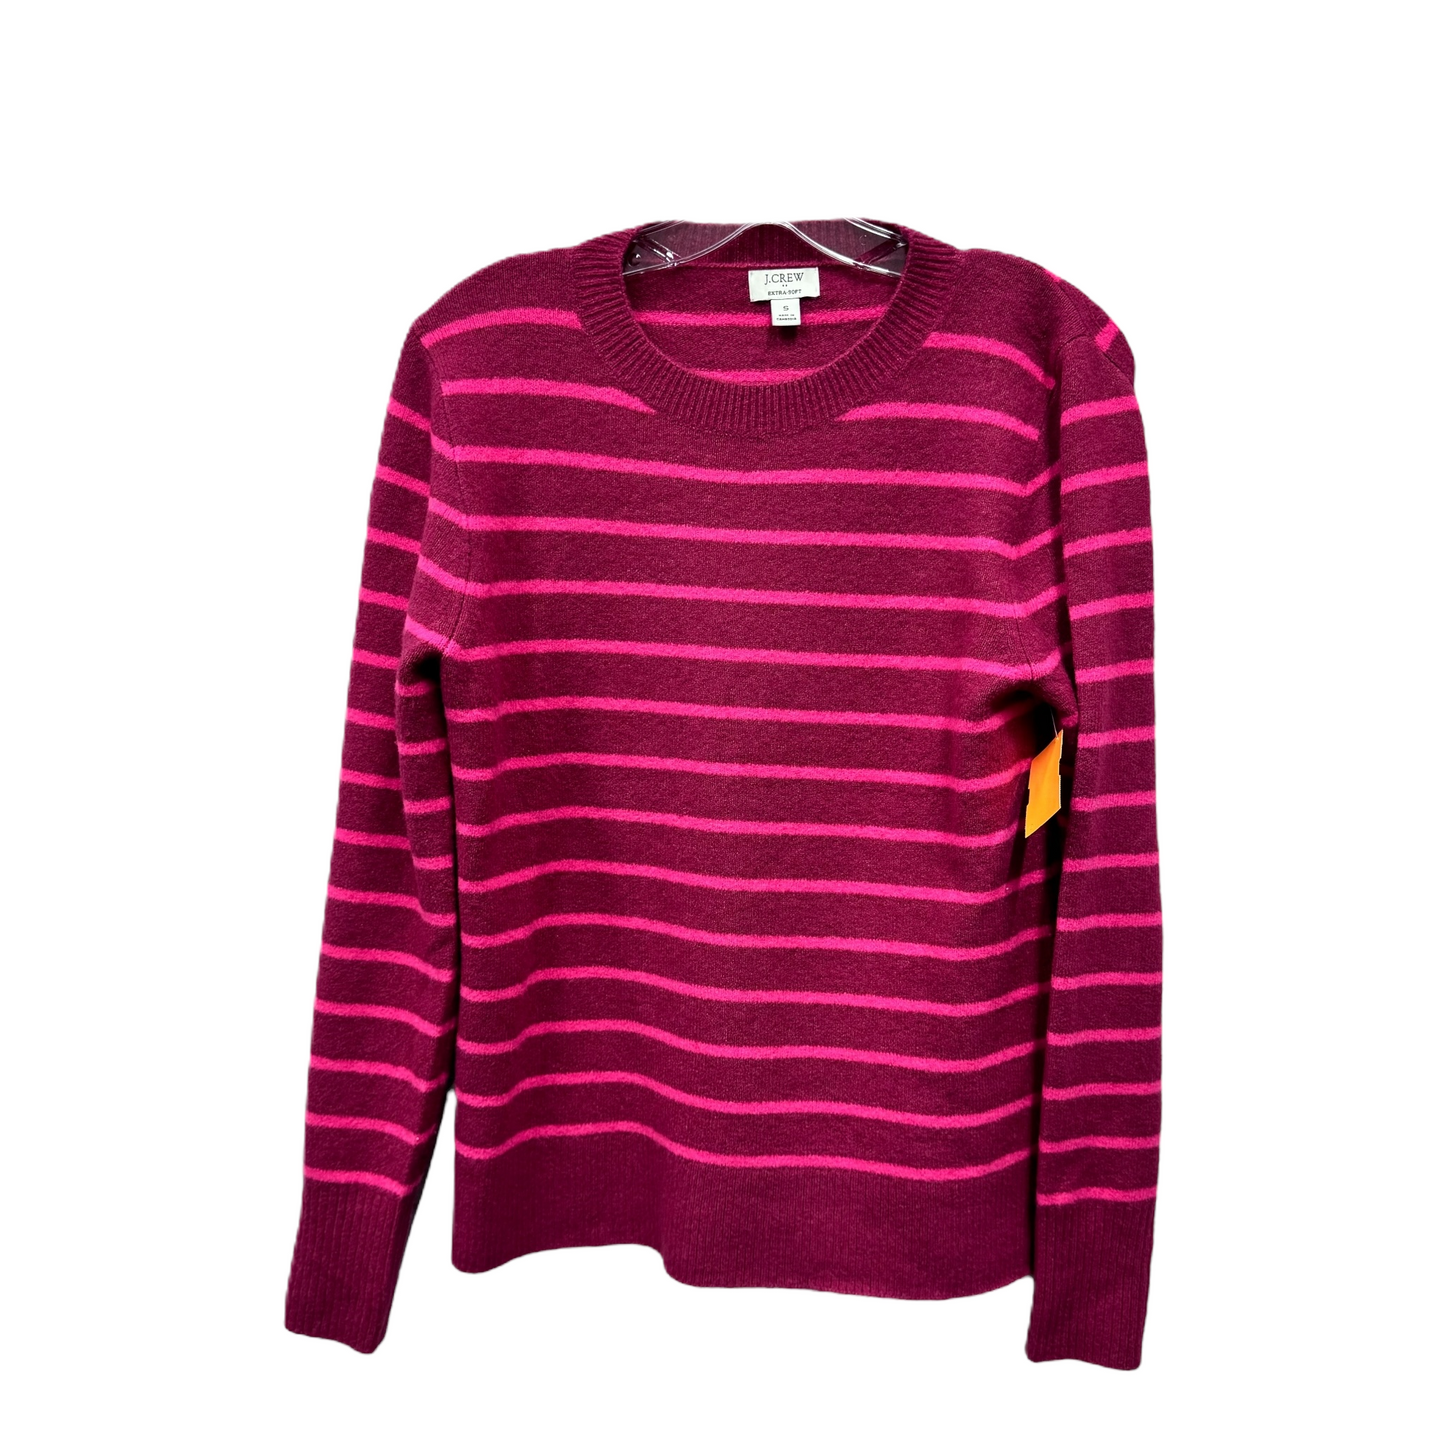 Sweater By J Crew  Size: S